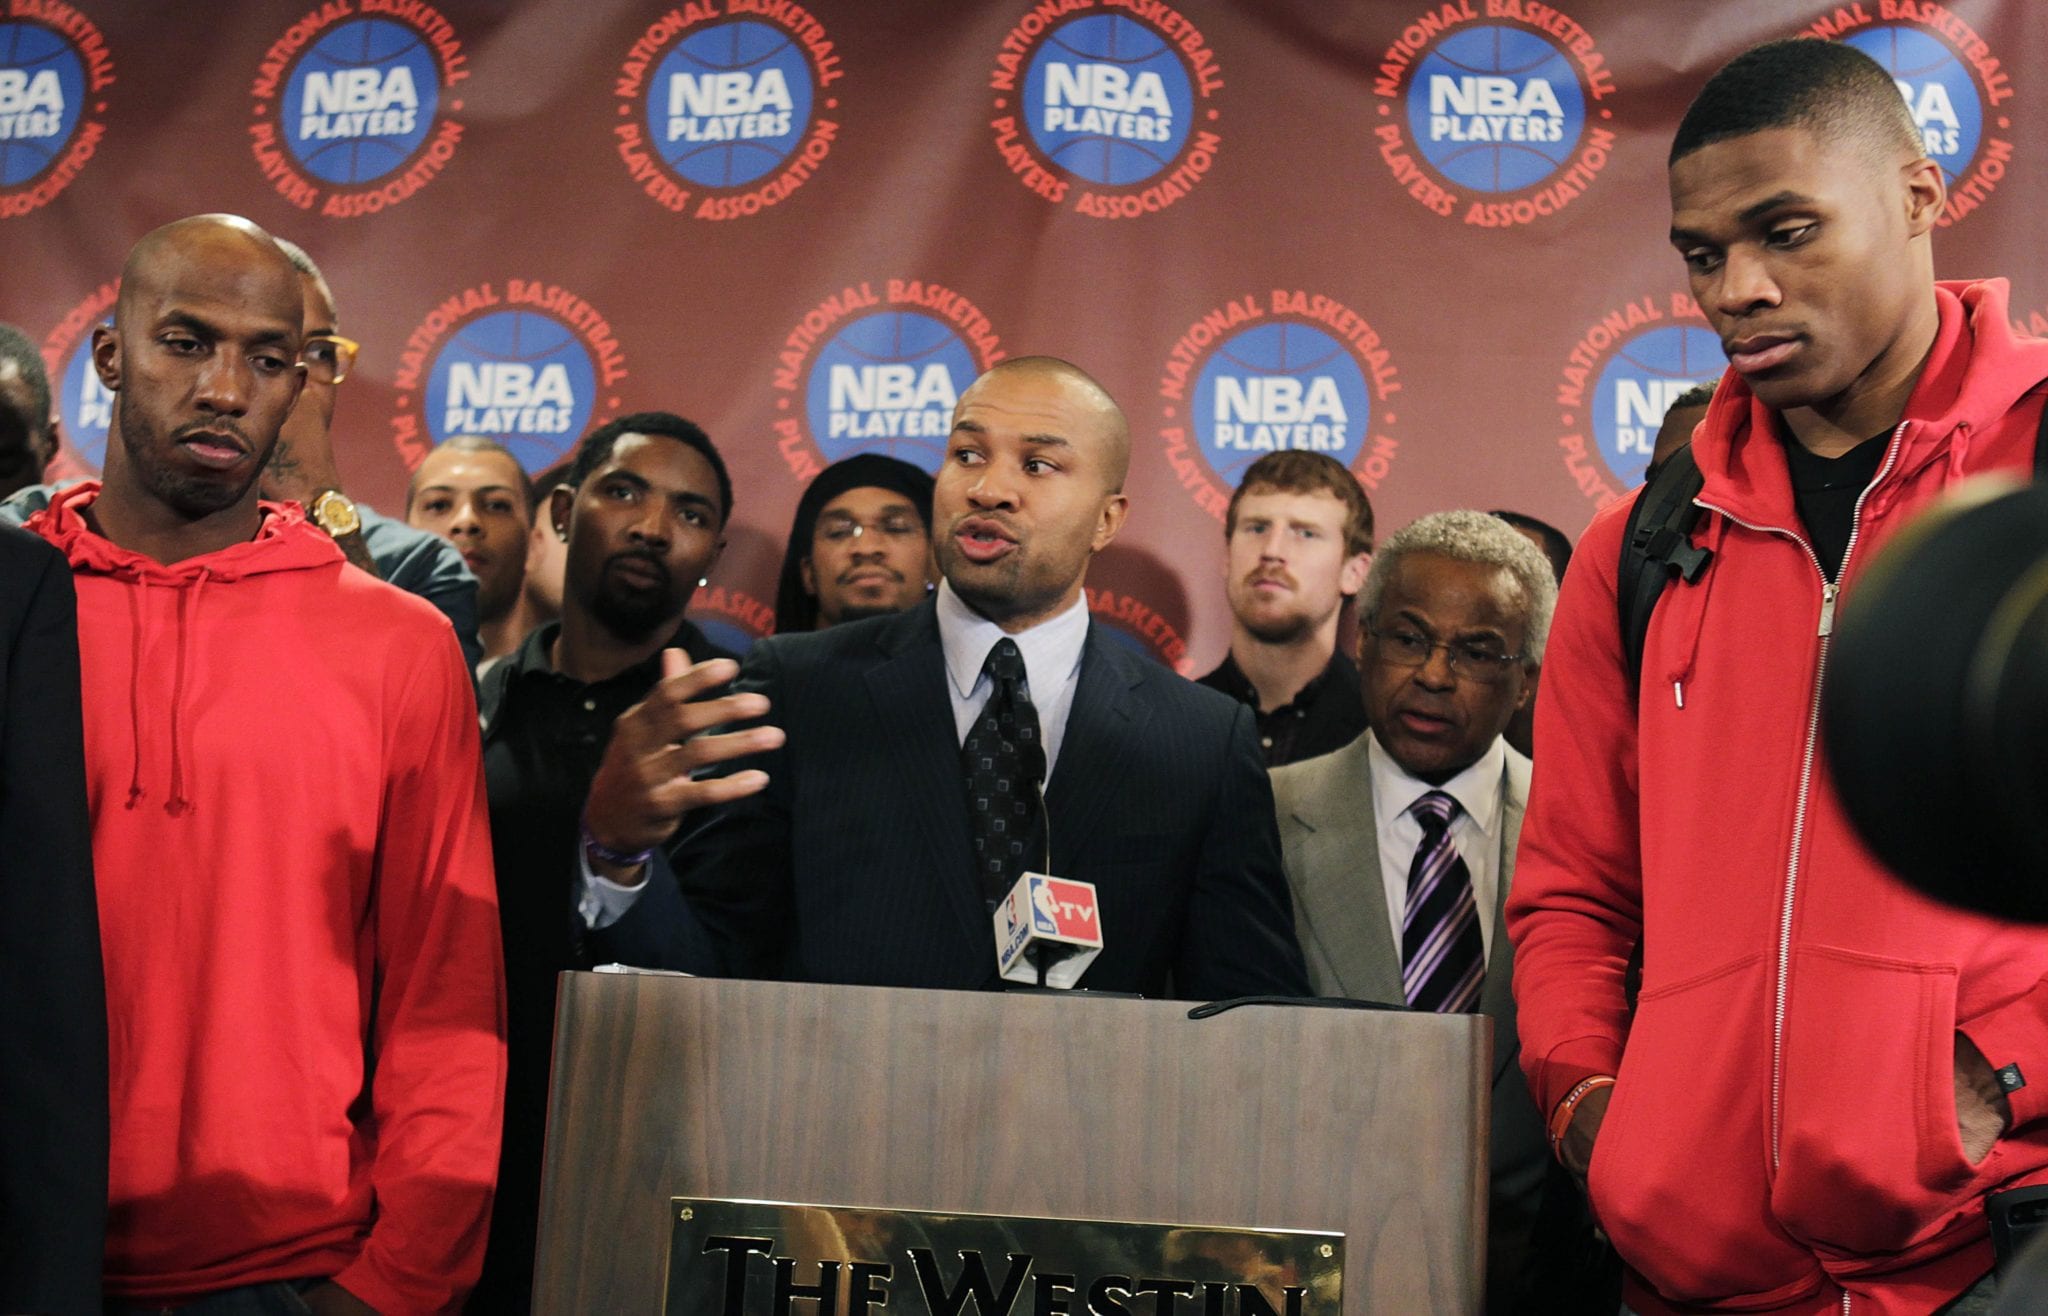 Flashback: Key Moments in the 2011 NBA Lockout